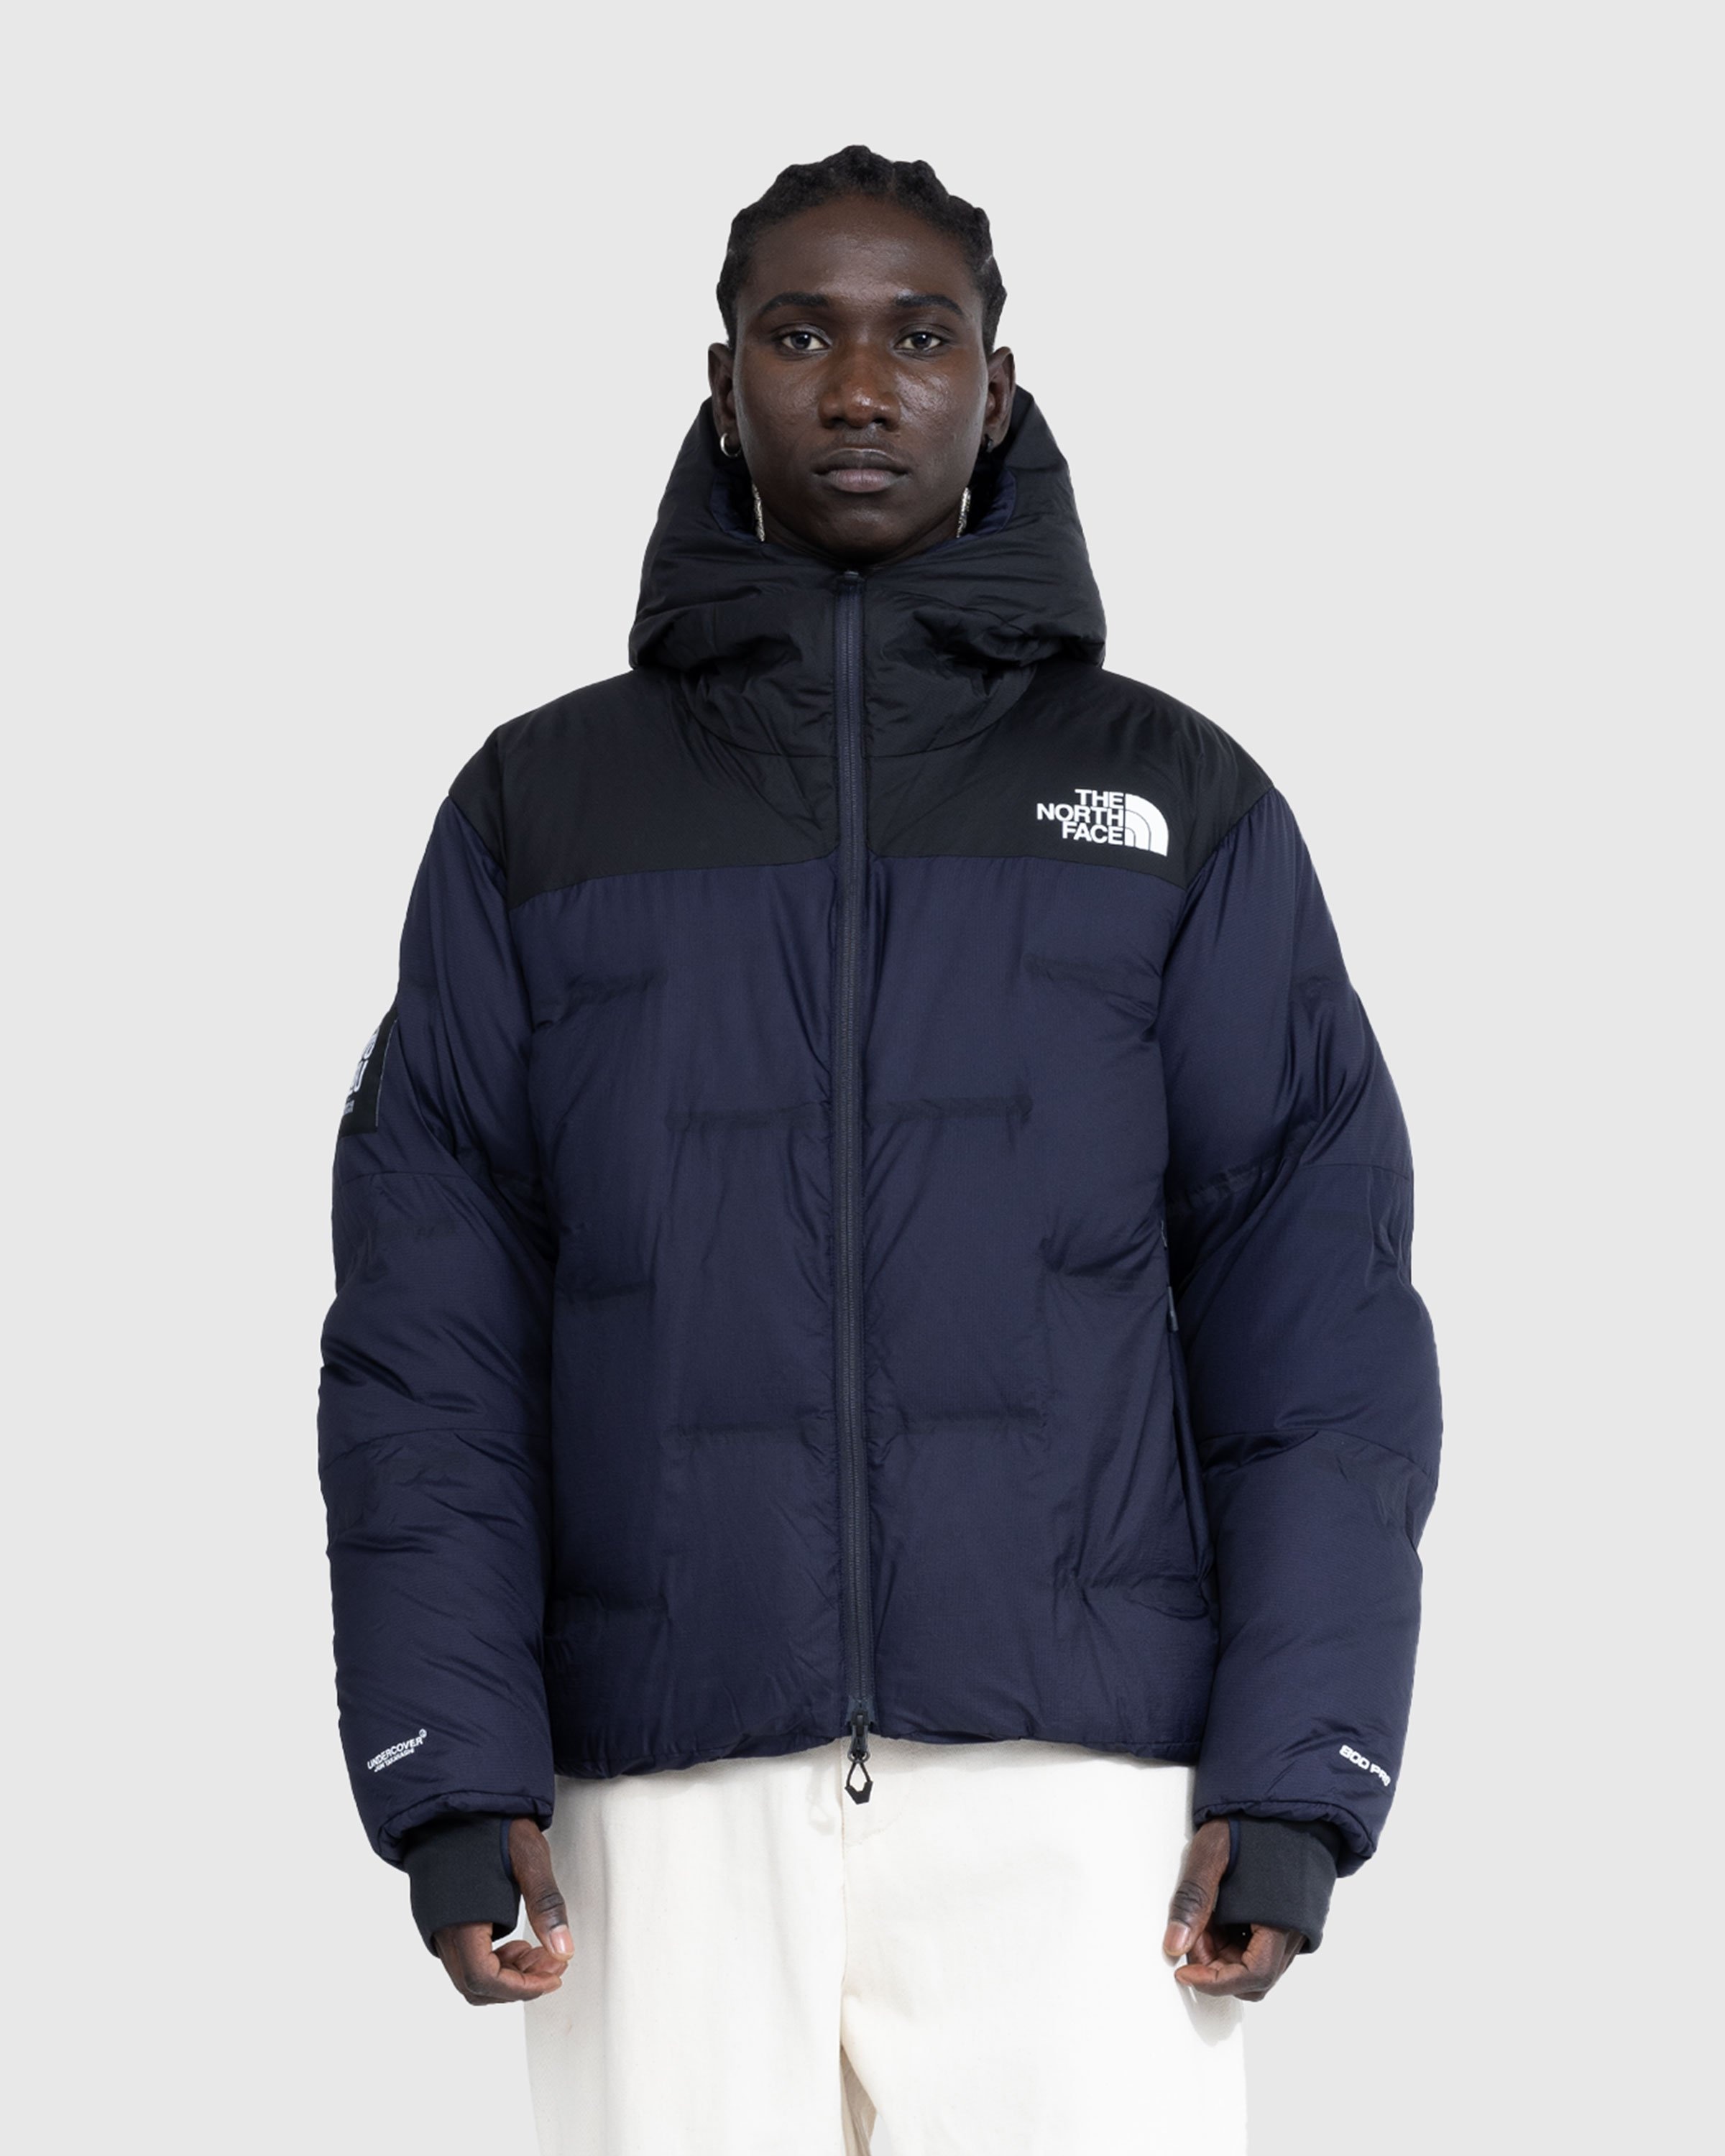 The North Face x UNDERCOVER – Soukuu Cloud Down Nupste Parka Black